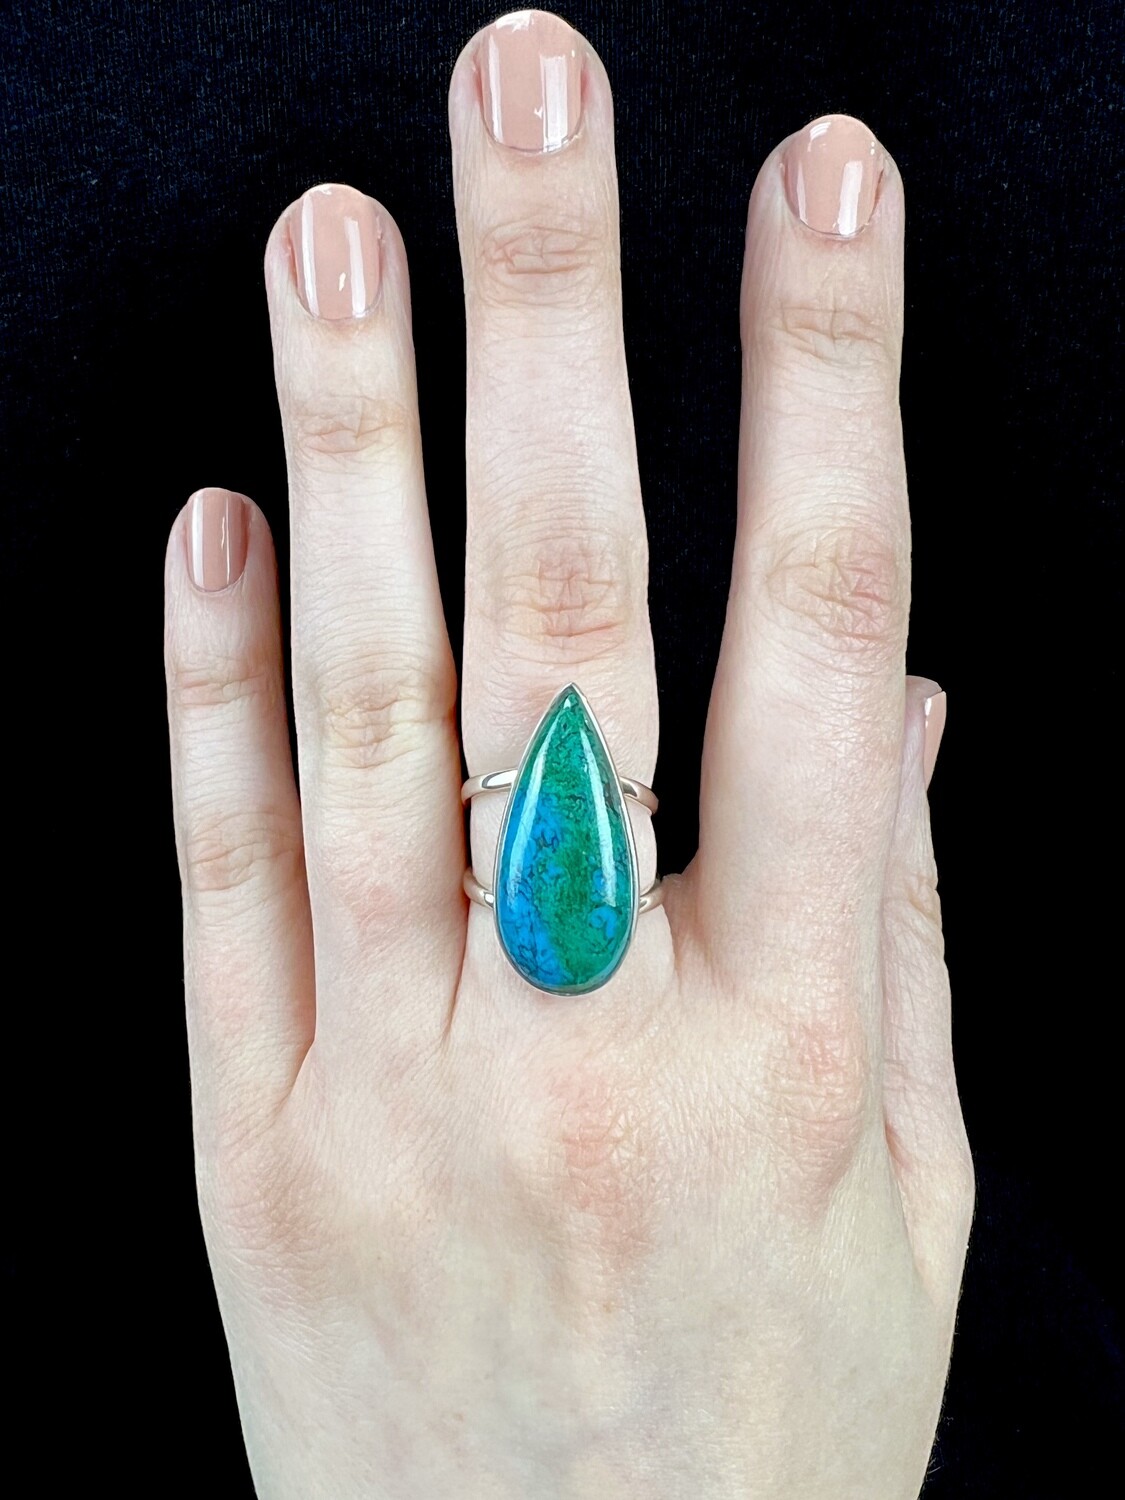 SIZE 6 ½ - Sterling Silver Chrysocolla Teardrop Ring - RIG6109